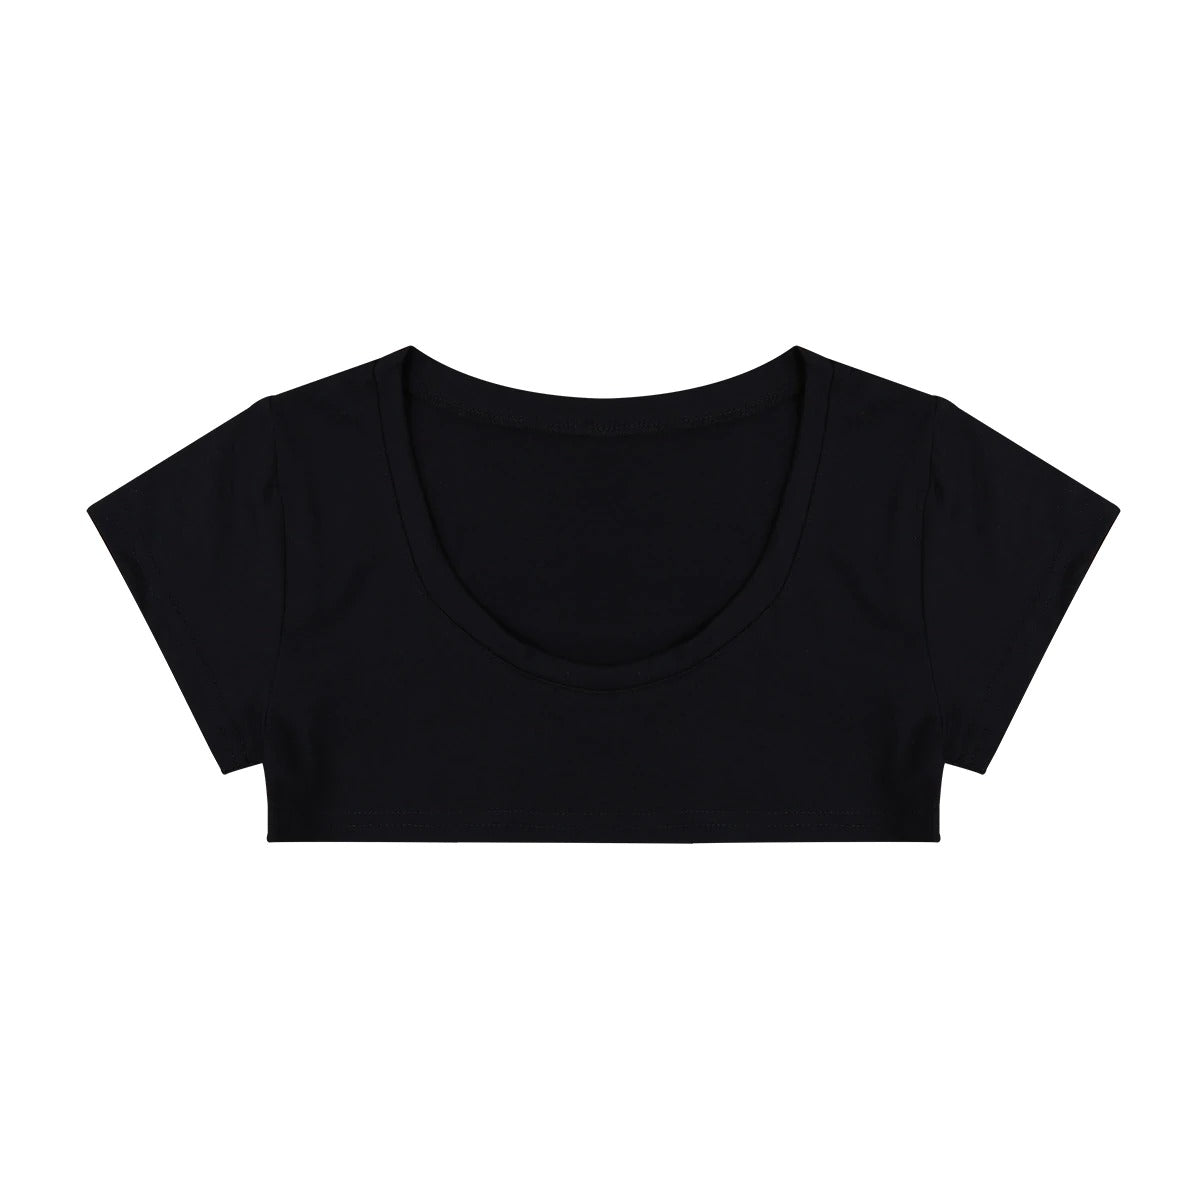 Super Cropped Summer Sexy T shirt / Women's Alternative Fashion Cotton Tops for Night Hangout - HARD'N'HEAVY